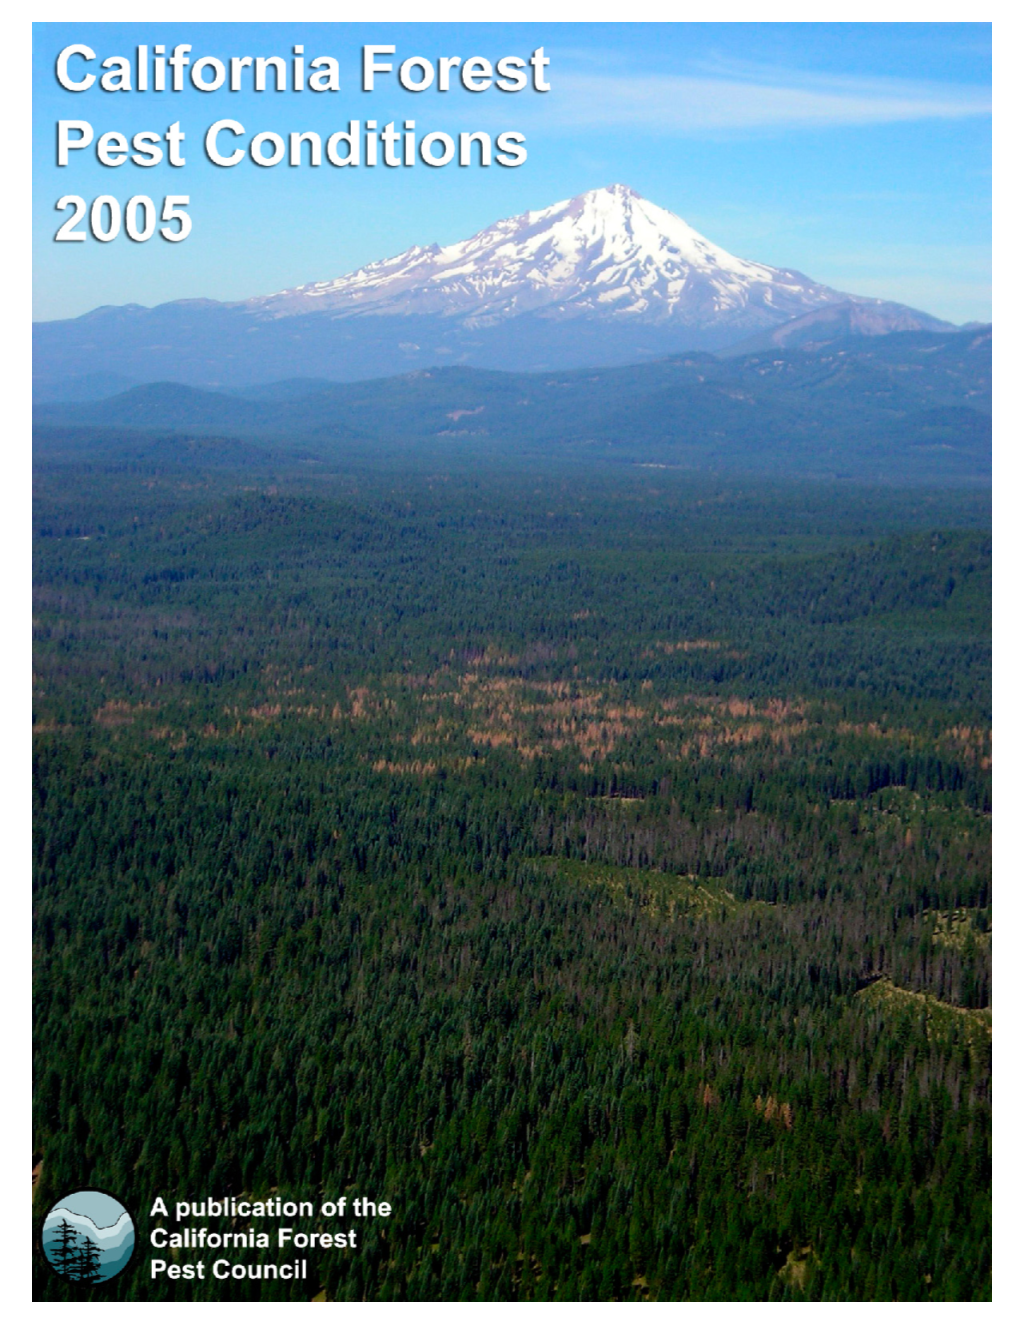 Forest Pest Conditions in California, 2005